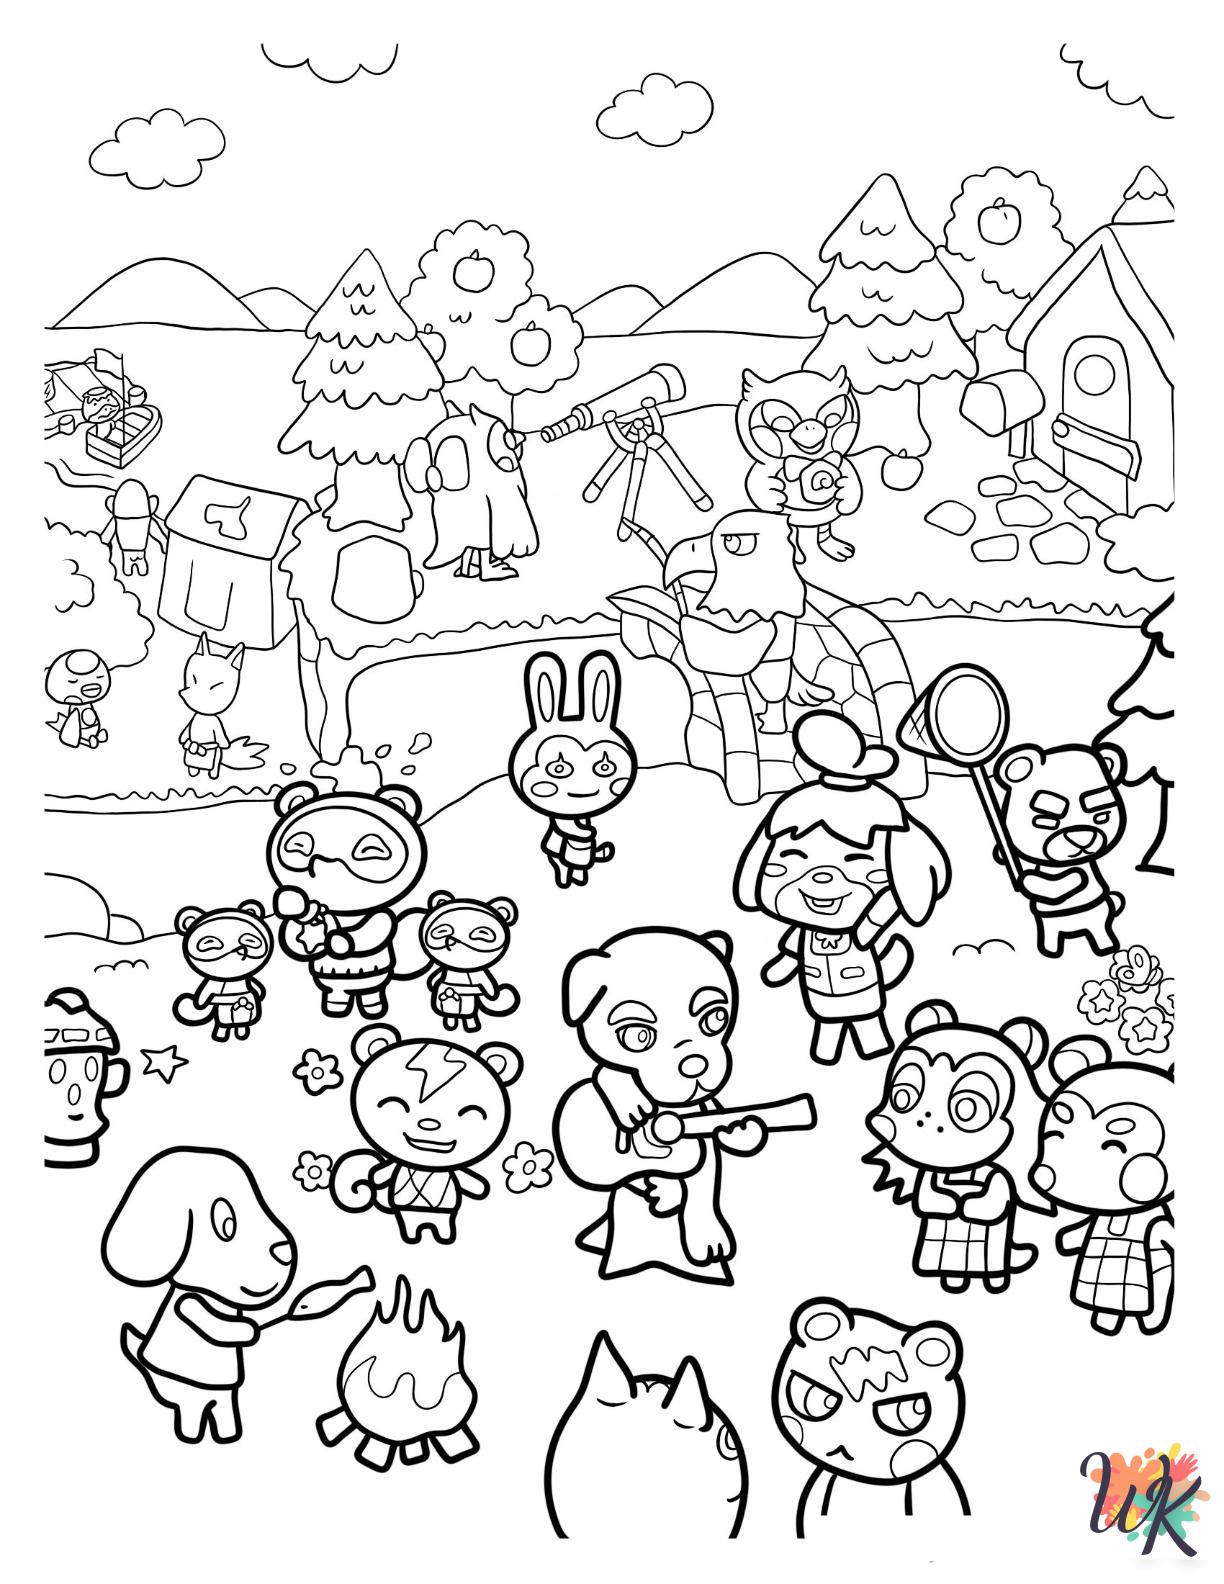 Animal Crossing coloring pages for adults